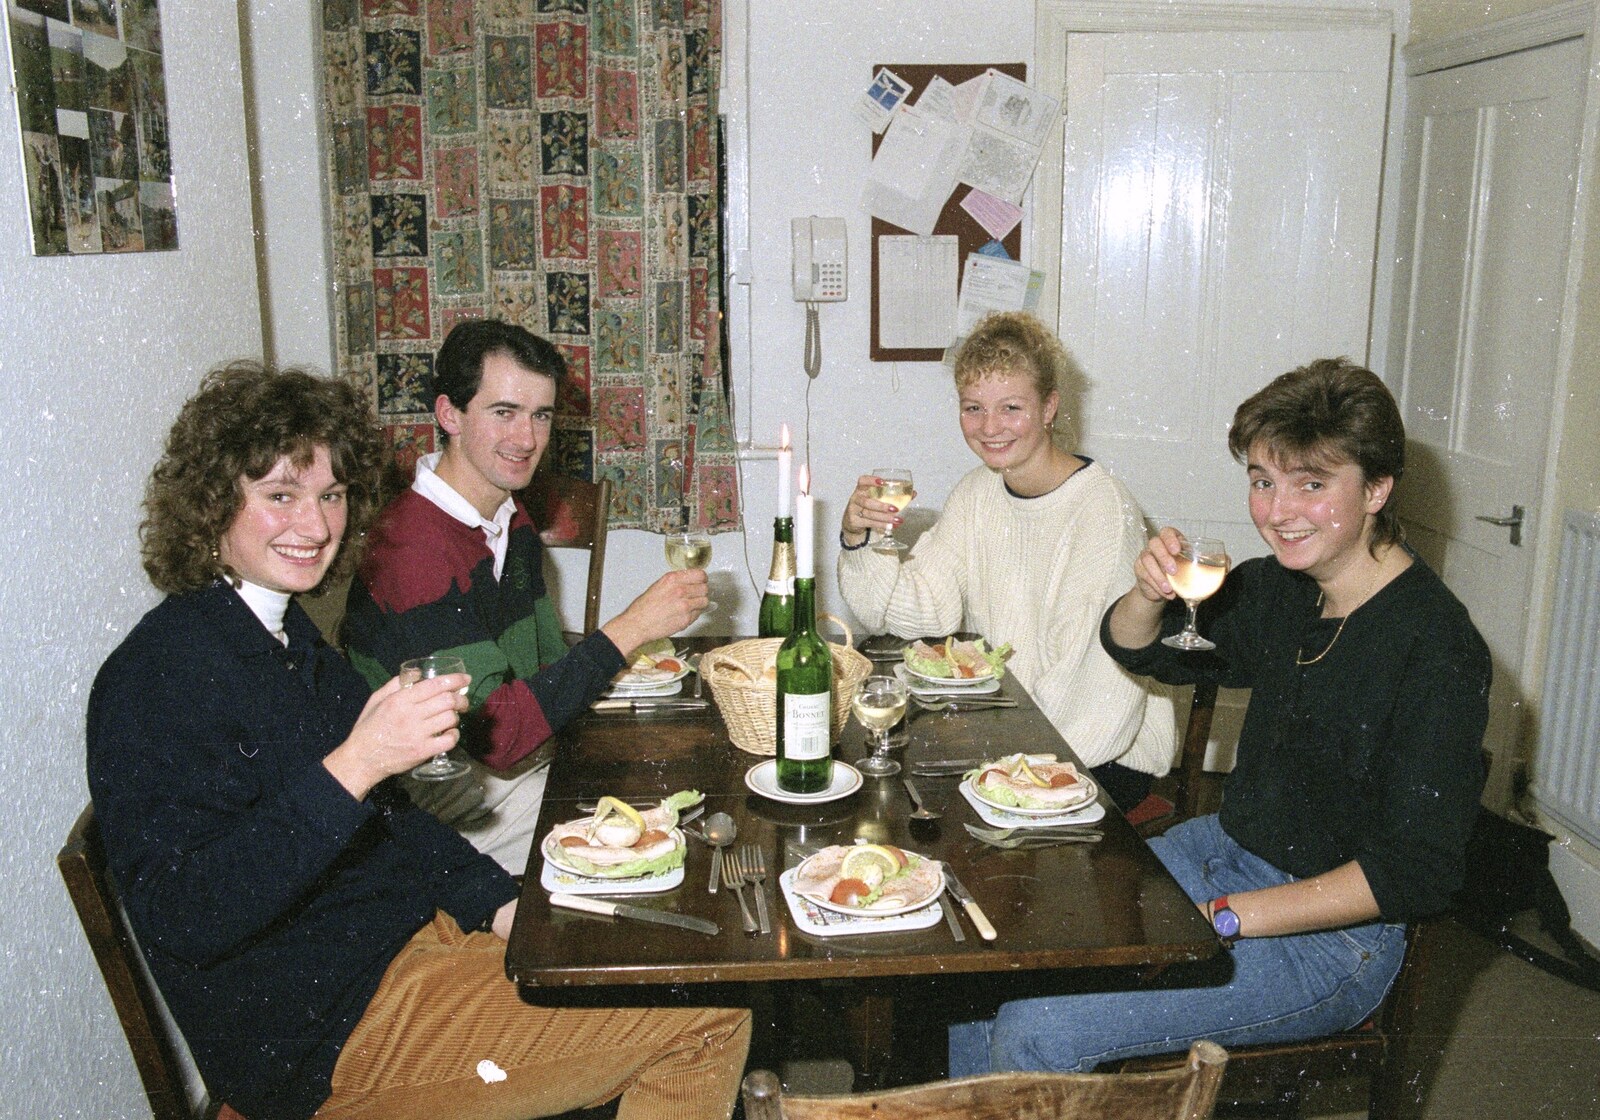 Dinner party starter moment from A Trip to Kenilworth, Warwickshire - 21st September 1989